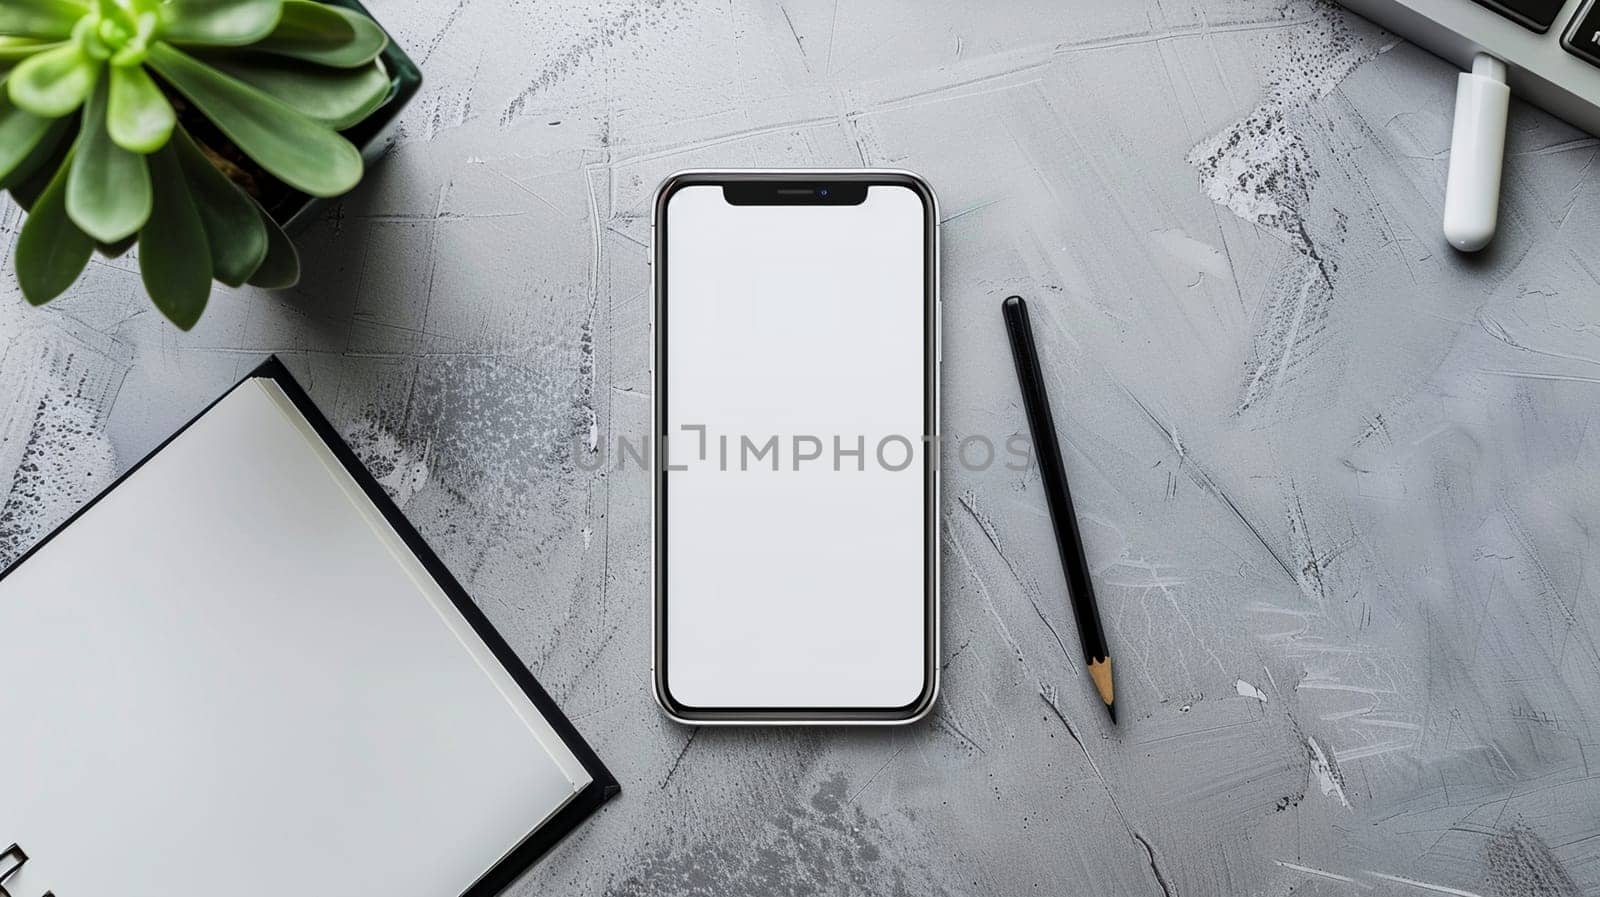 Smartphone mock-up lies on textured desk surface near stationery, green succulent, and blank notepad, creating minimalist workspace scene.